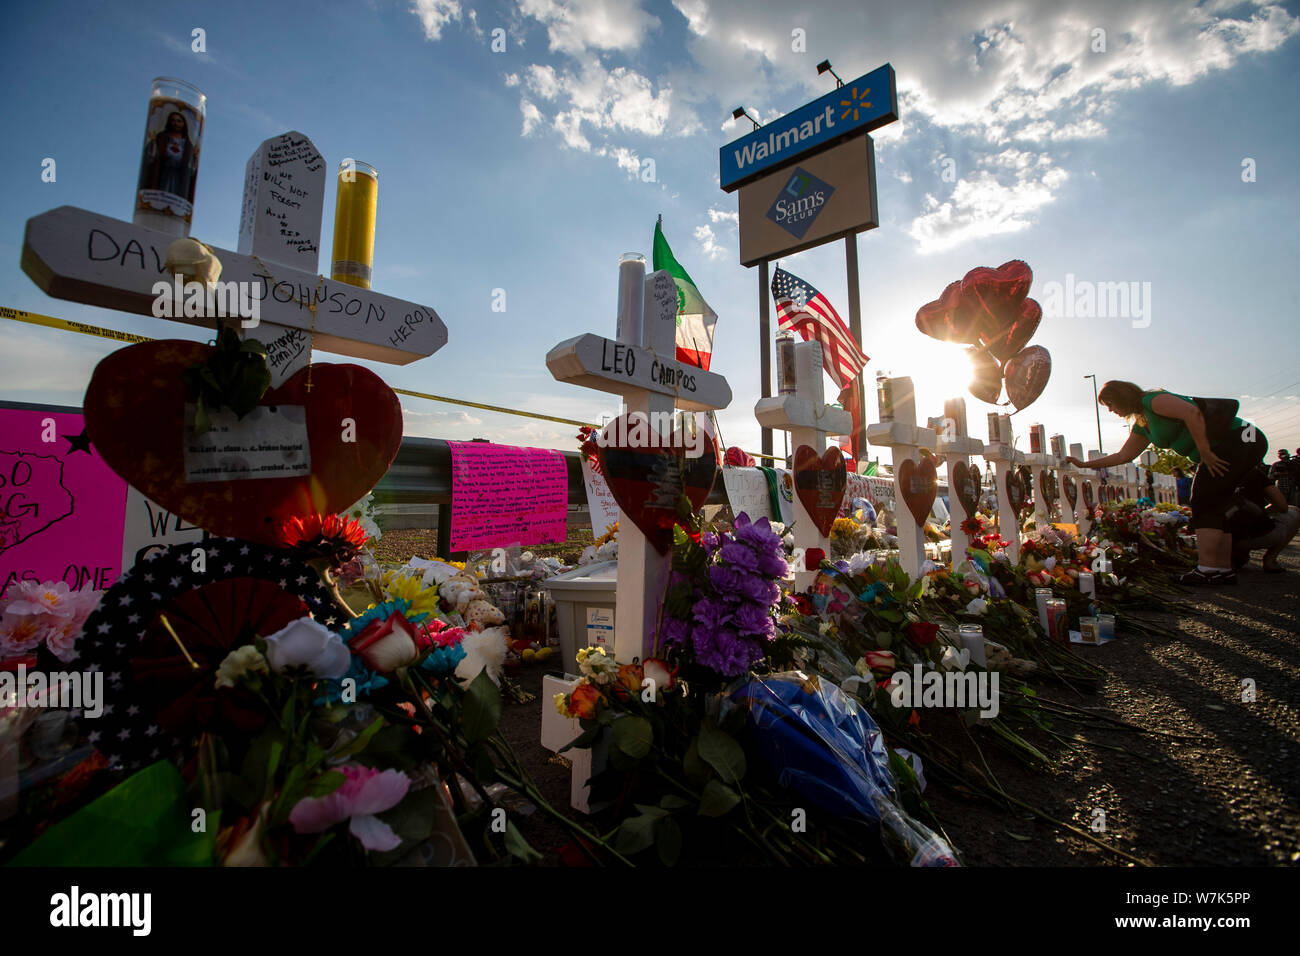 Beijing, USA. 5th Aug, 2019. Crosses with names of victims are placed near the Walmart center where the Saturday's massive shooting took place, in El Paso, Texas, the United States, Aug. 5, 2019. Credit: Wang Ying/Xinhua/Alamy Live News Stock Photo